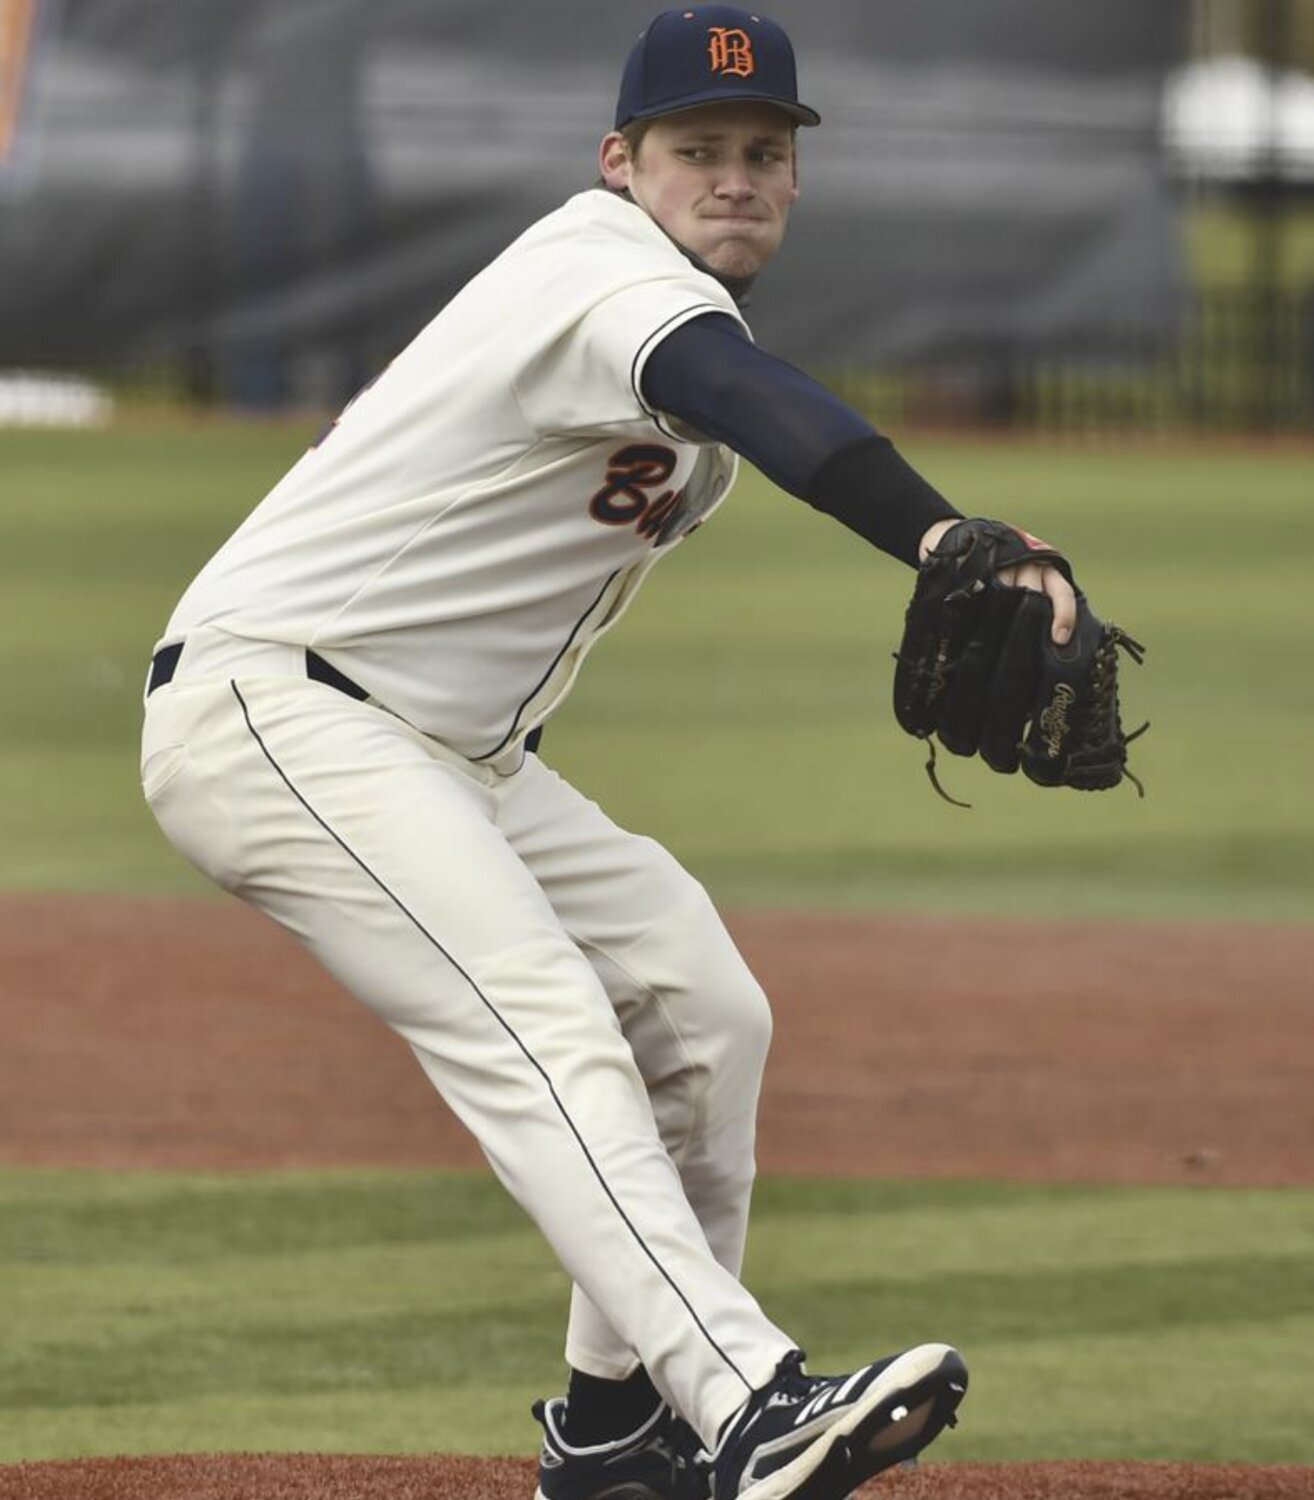 Sullivan West graduate Bryce Reimer pitches in a game for Bucknell University. Reimer is a junior pitcher for the Division I school in Pennsylvania.